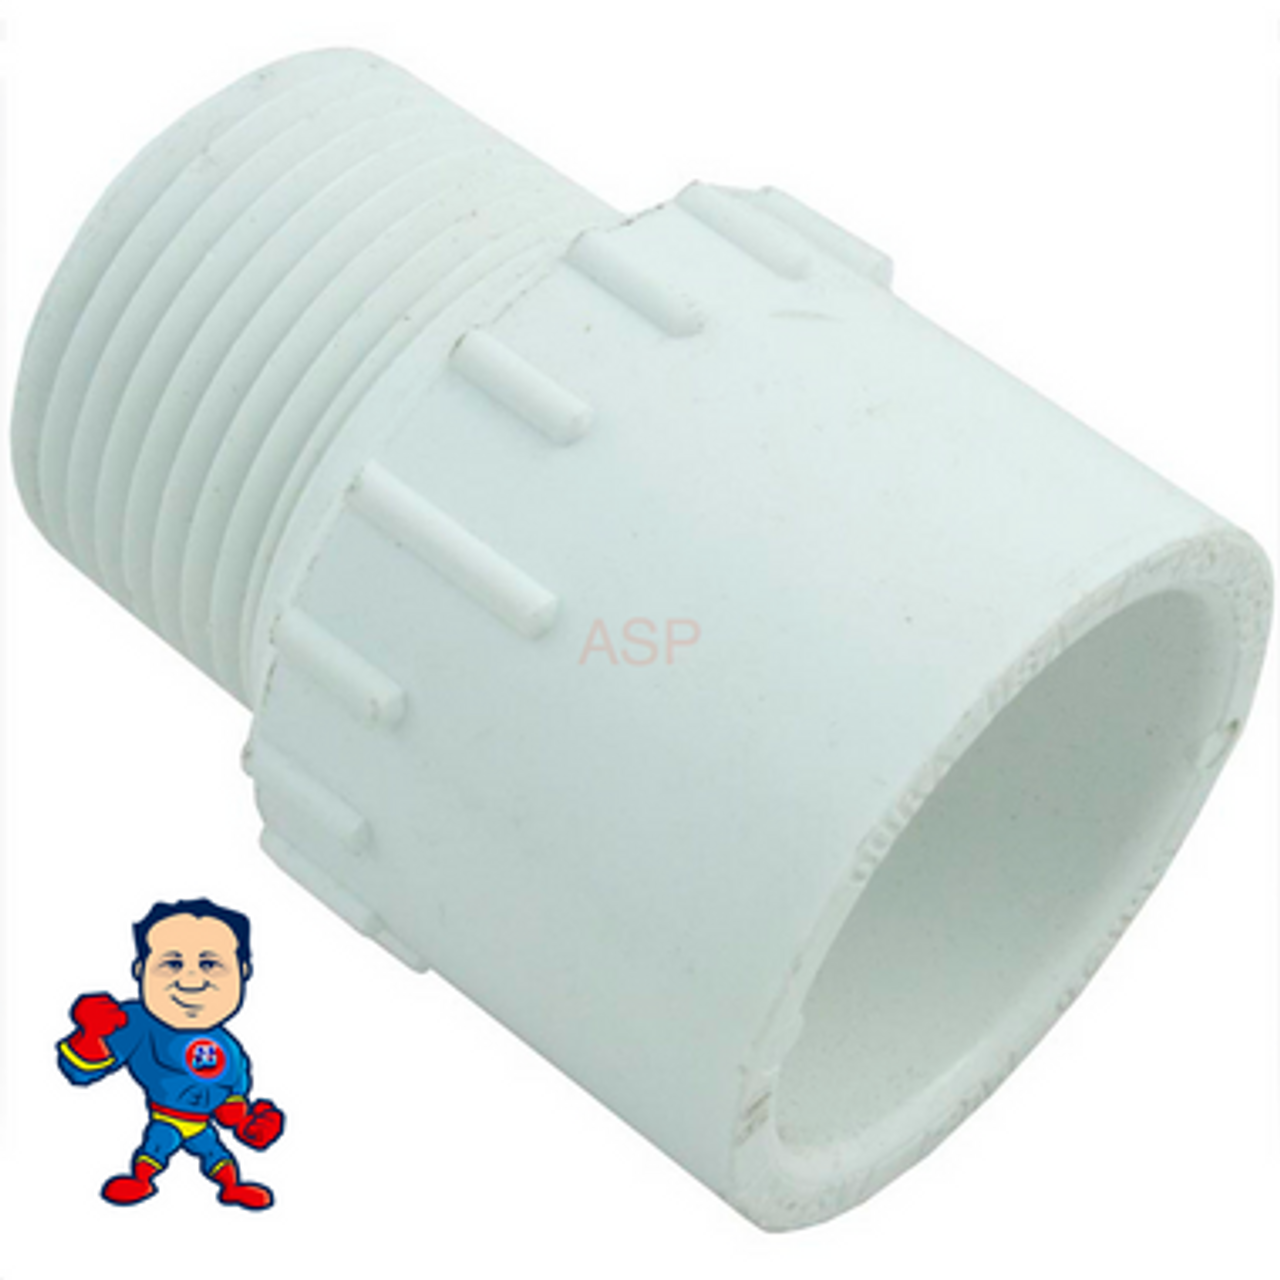 Male Pipe Fitting, Adapter, 1" Slip x 1" MPT